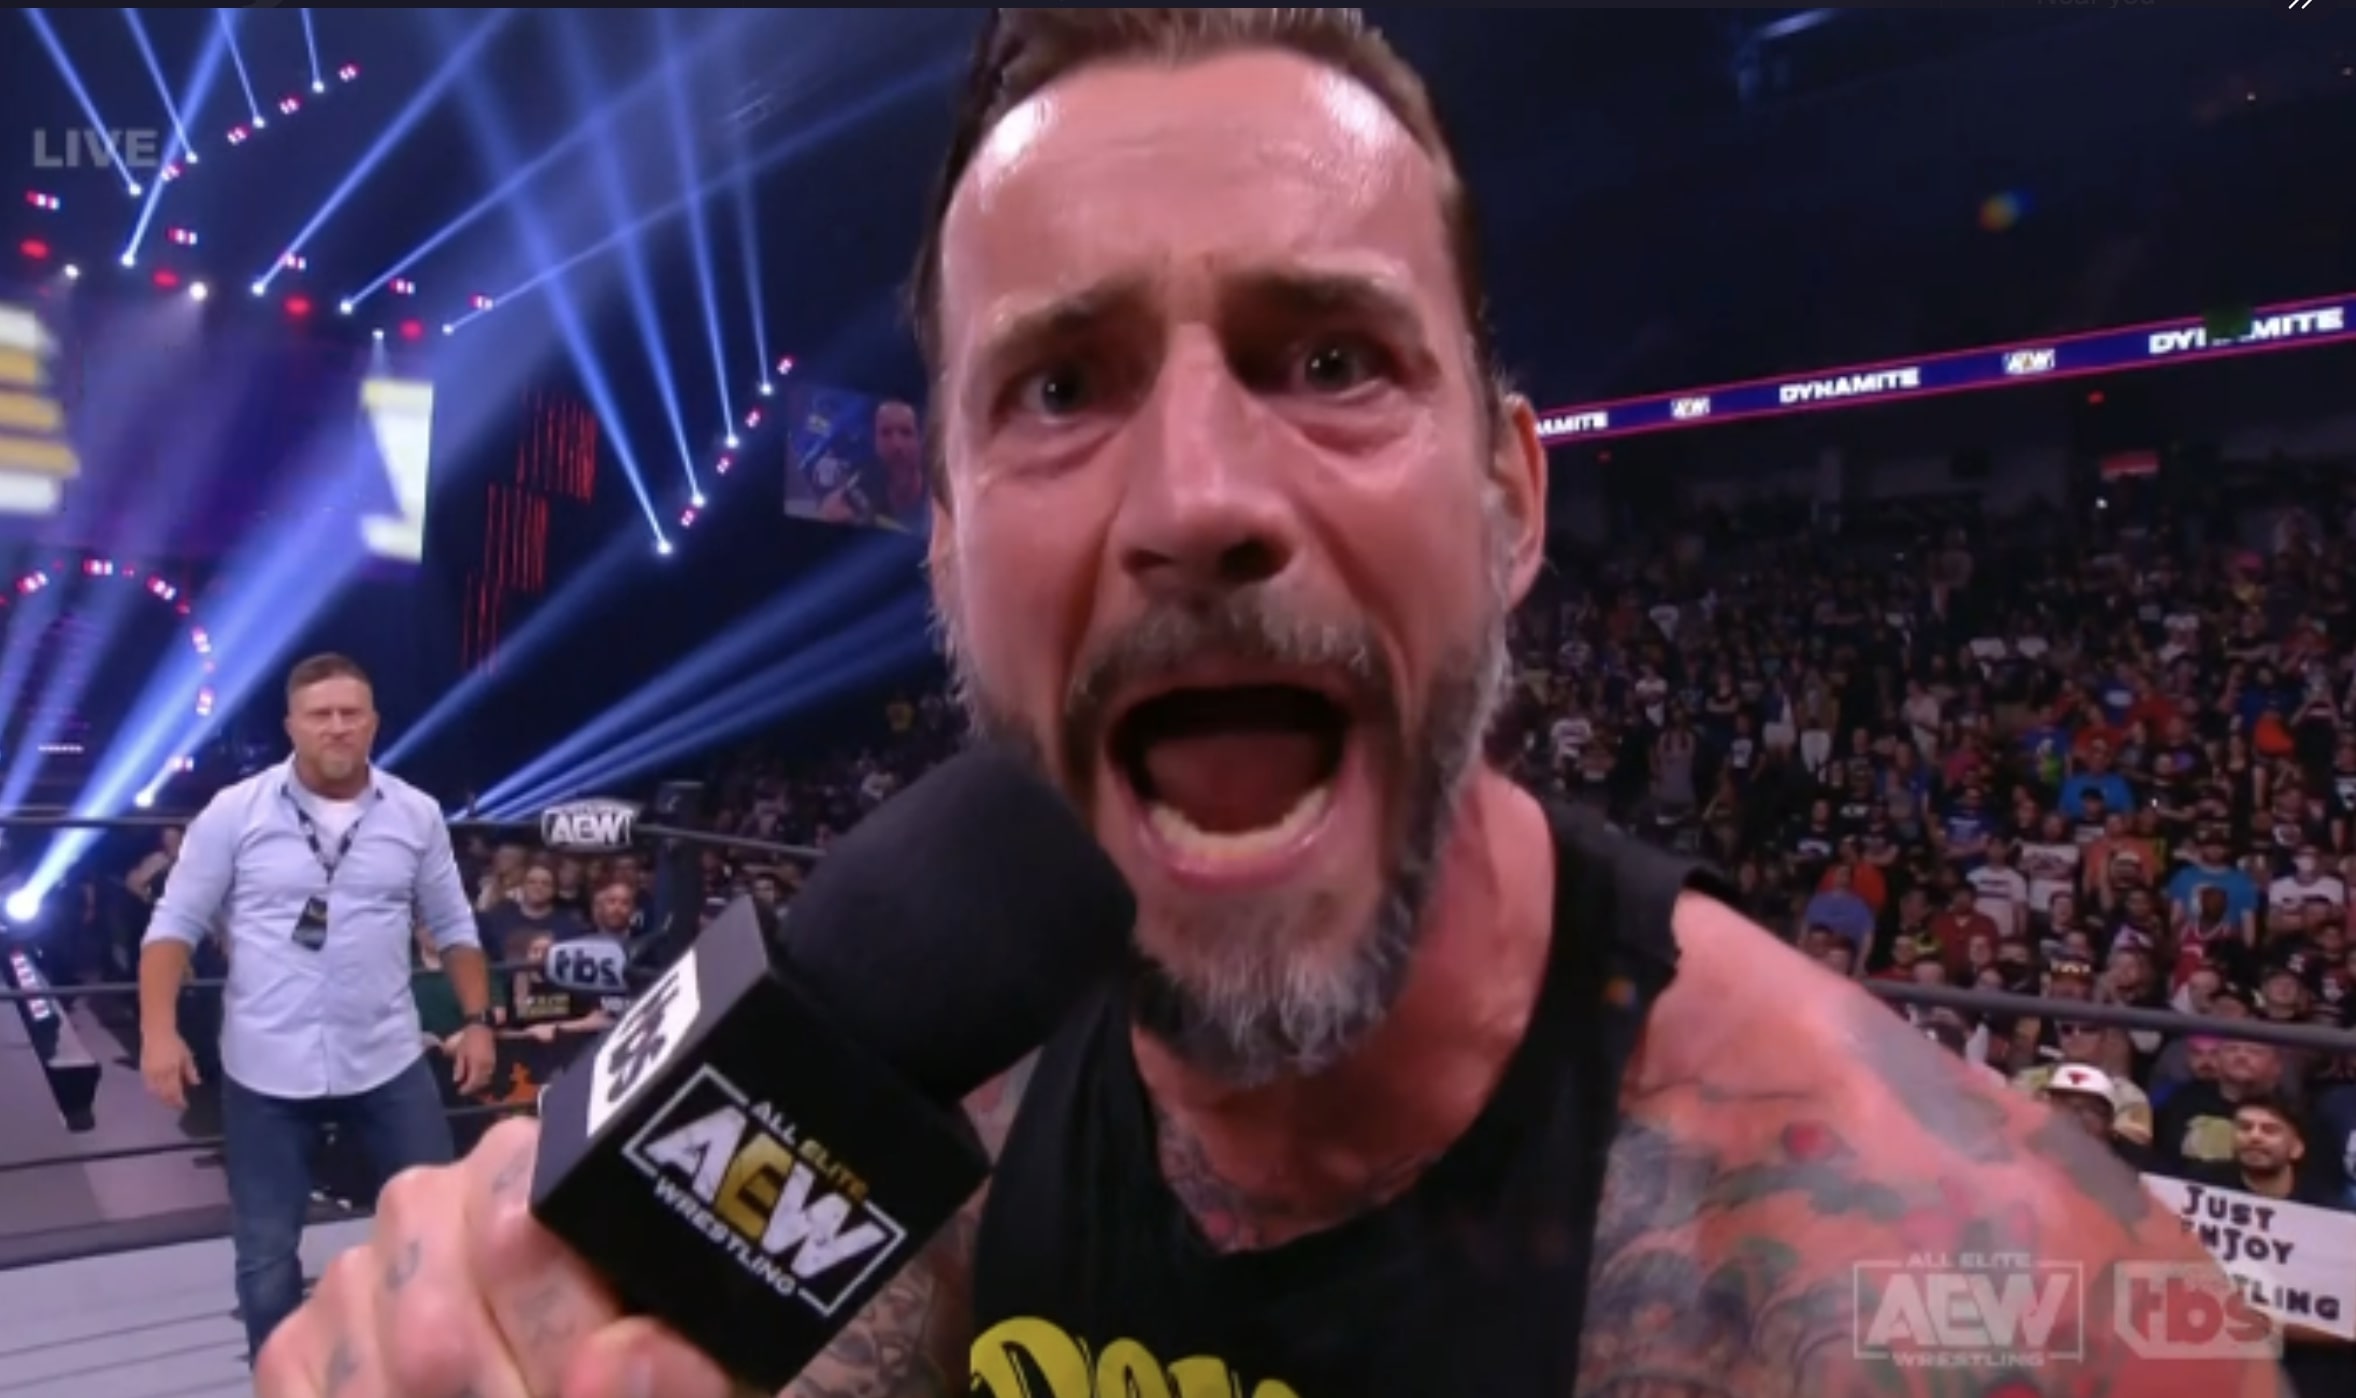 CM Punk Reacts To Colt Cabana Chants During Promo On AEW Dynamite.